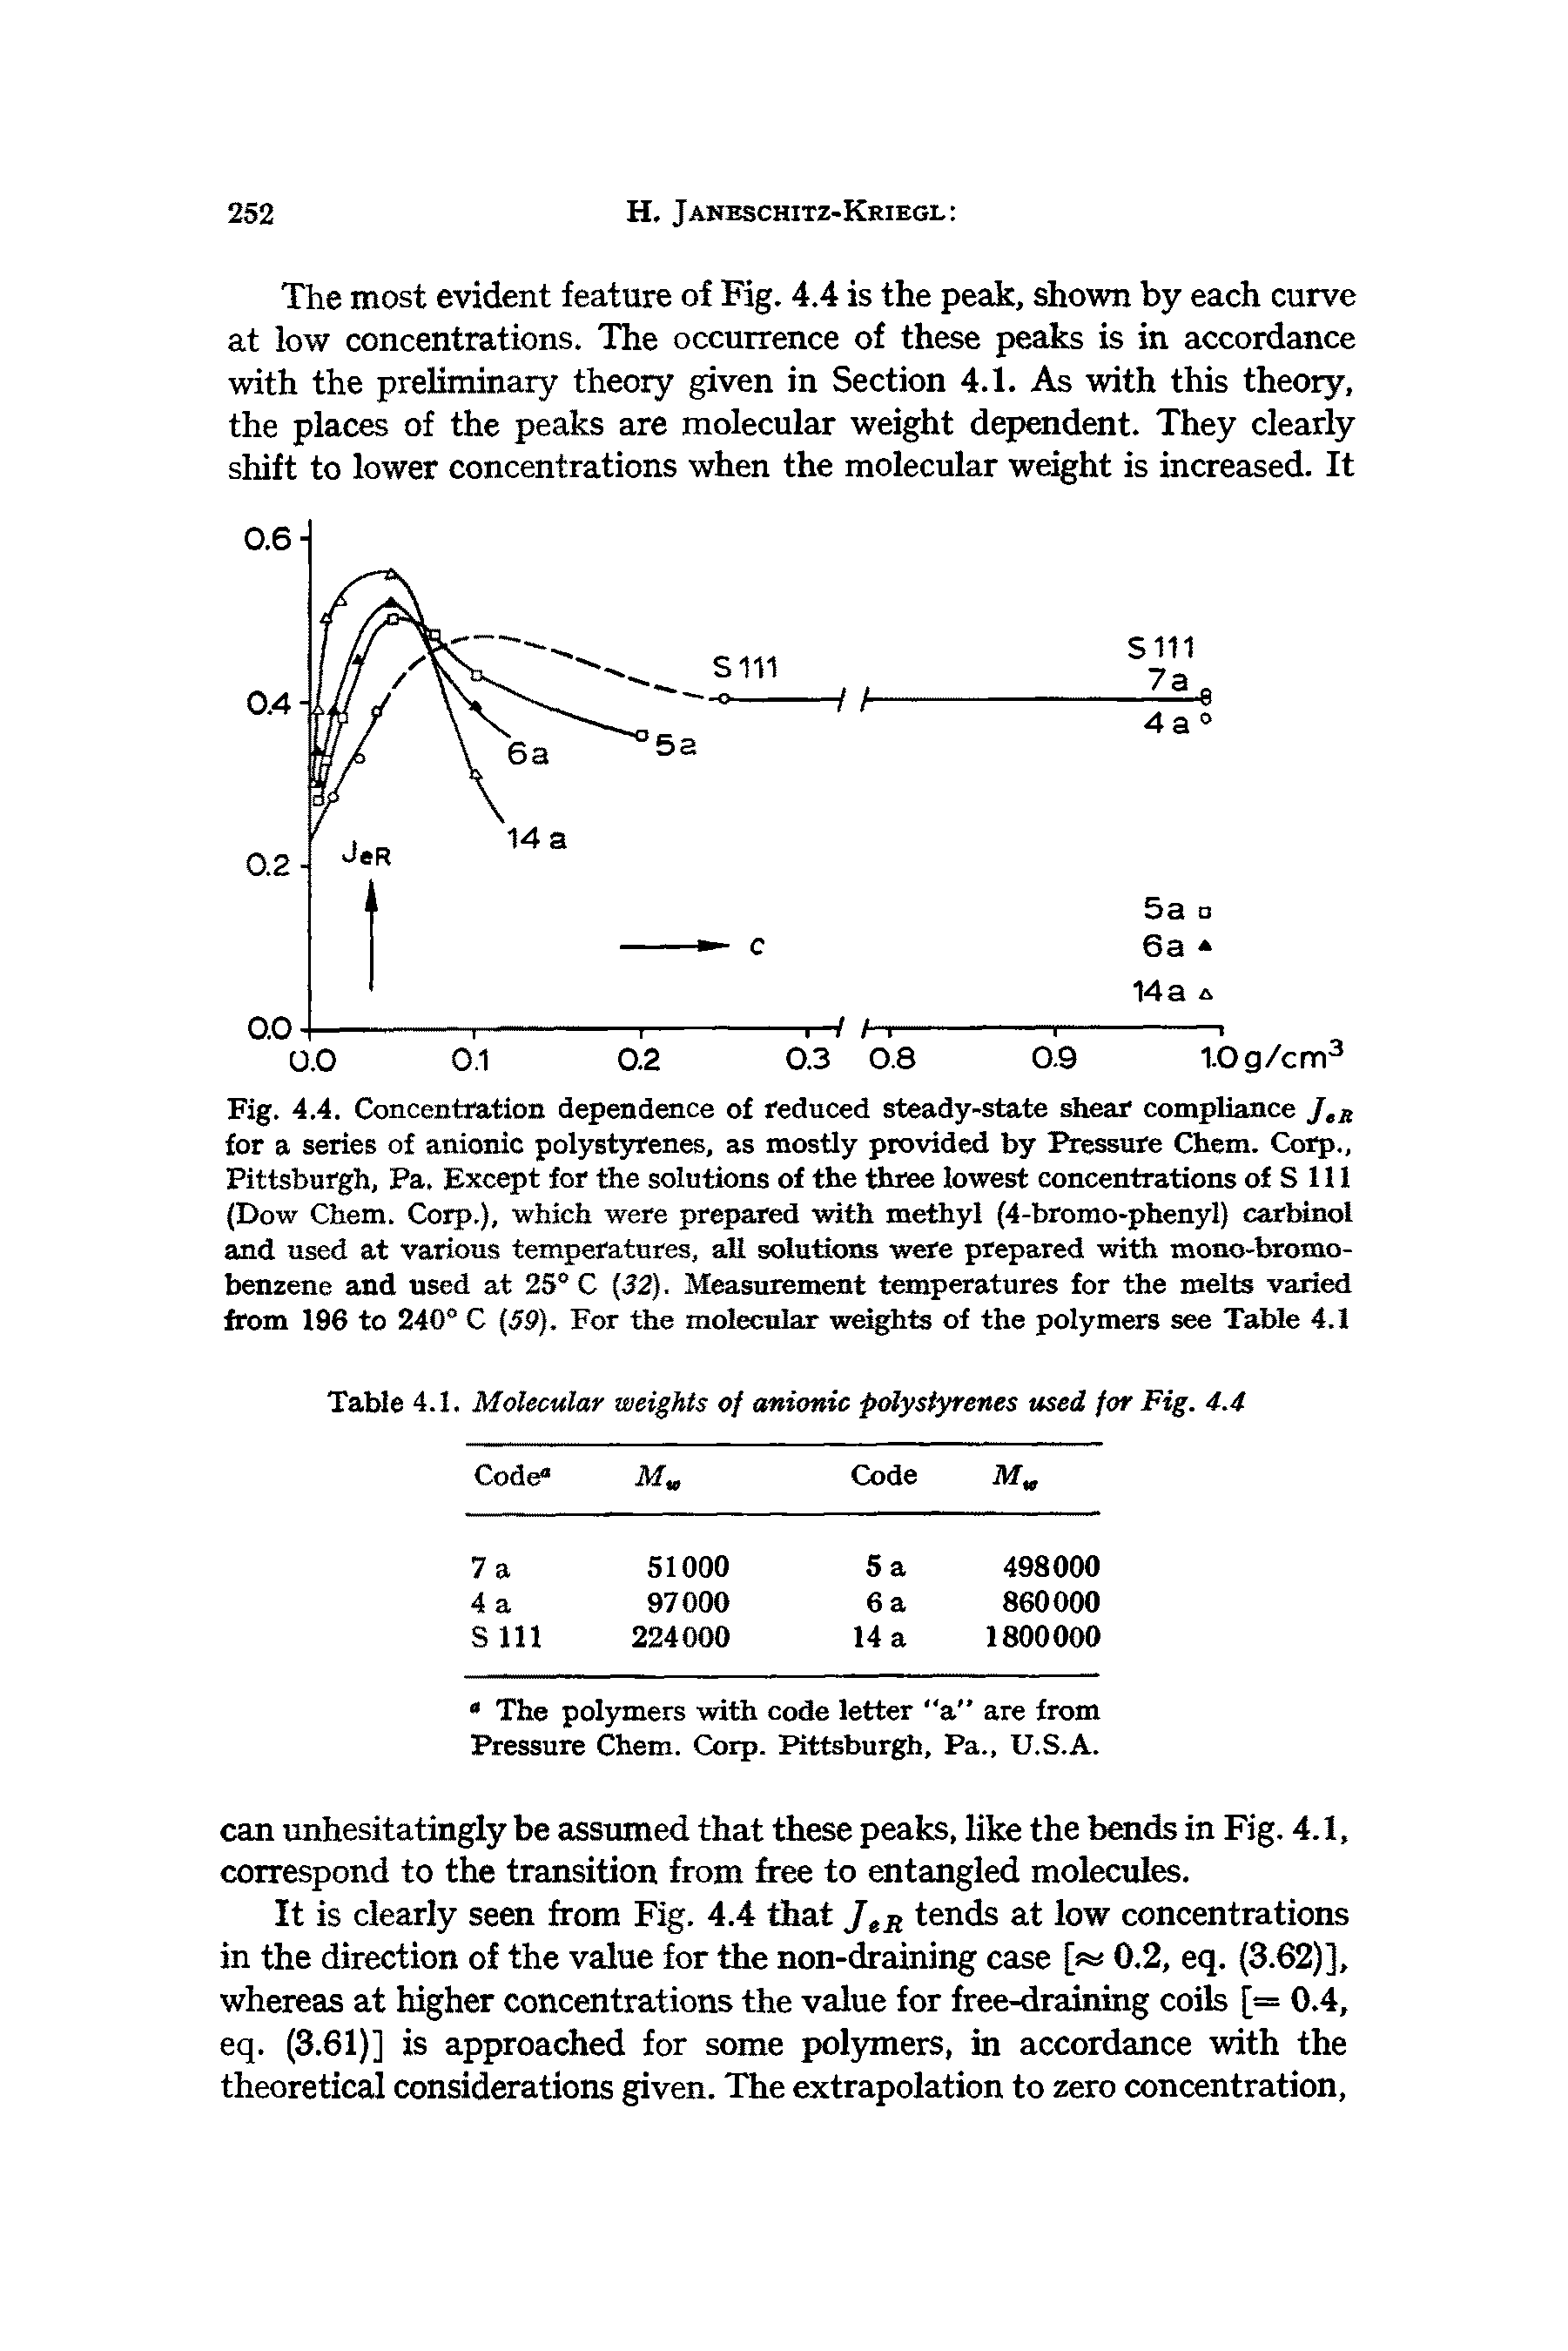 Fig. 4.4. Concentration dependence of reduced steady-state shear compliance J,B for a series of anionic polystyrenes, as mostly provided by Pressure Chem. Corp., Pittsburgh, Pa. Except for the solutions of the three lowest concentrations of S 111 (Dow Chem. Corp.), which were prepared with methyl (4-bromo-phenyl) carbinol and used at various temperatures, all solutions were prepared with mono-bromo-benzene and used at 25° C (32). Measurement temperatures for the melts varied from 196 to 240° C (59). For the molecular weights of the polymers see Table 4.1...